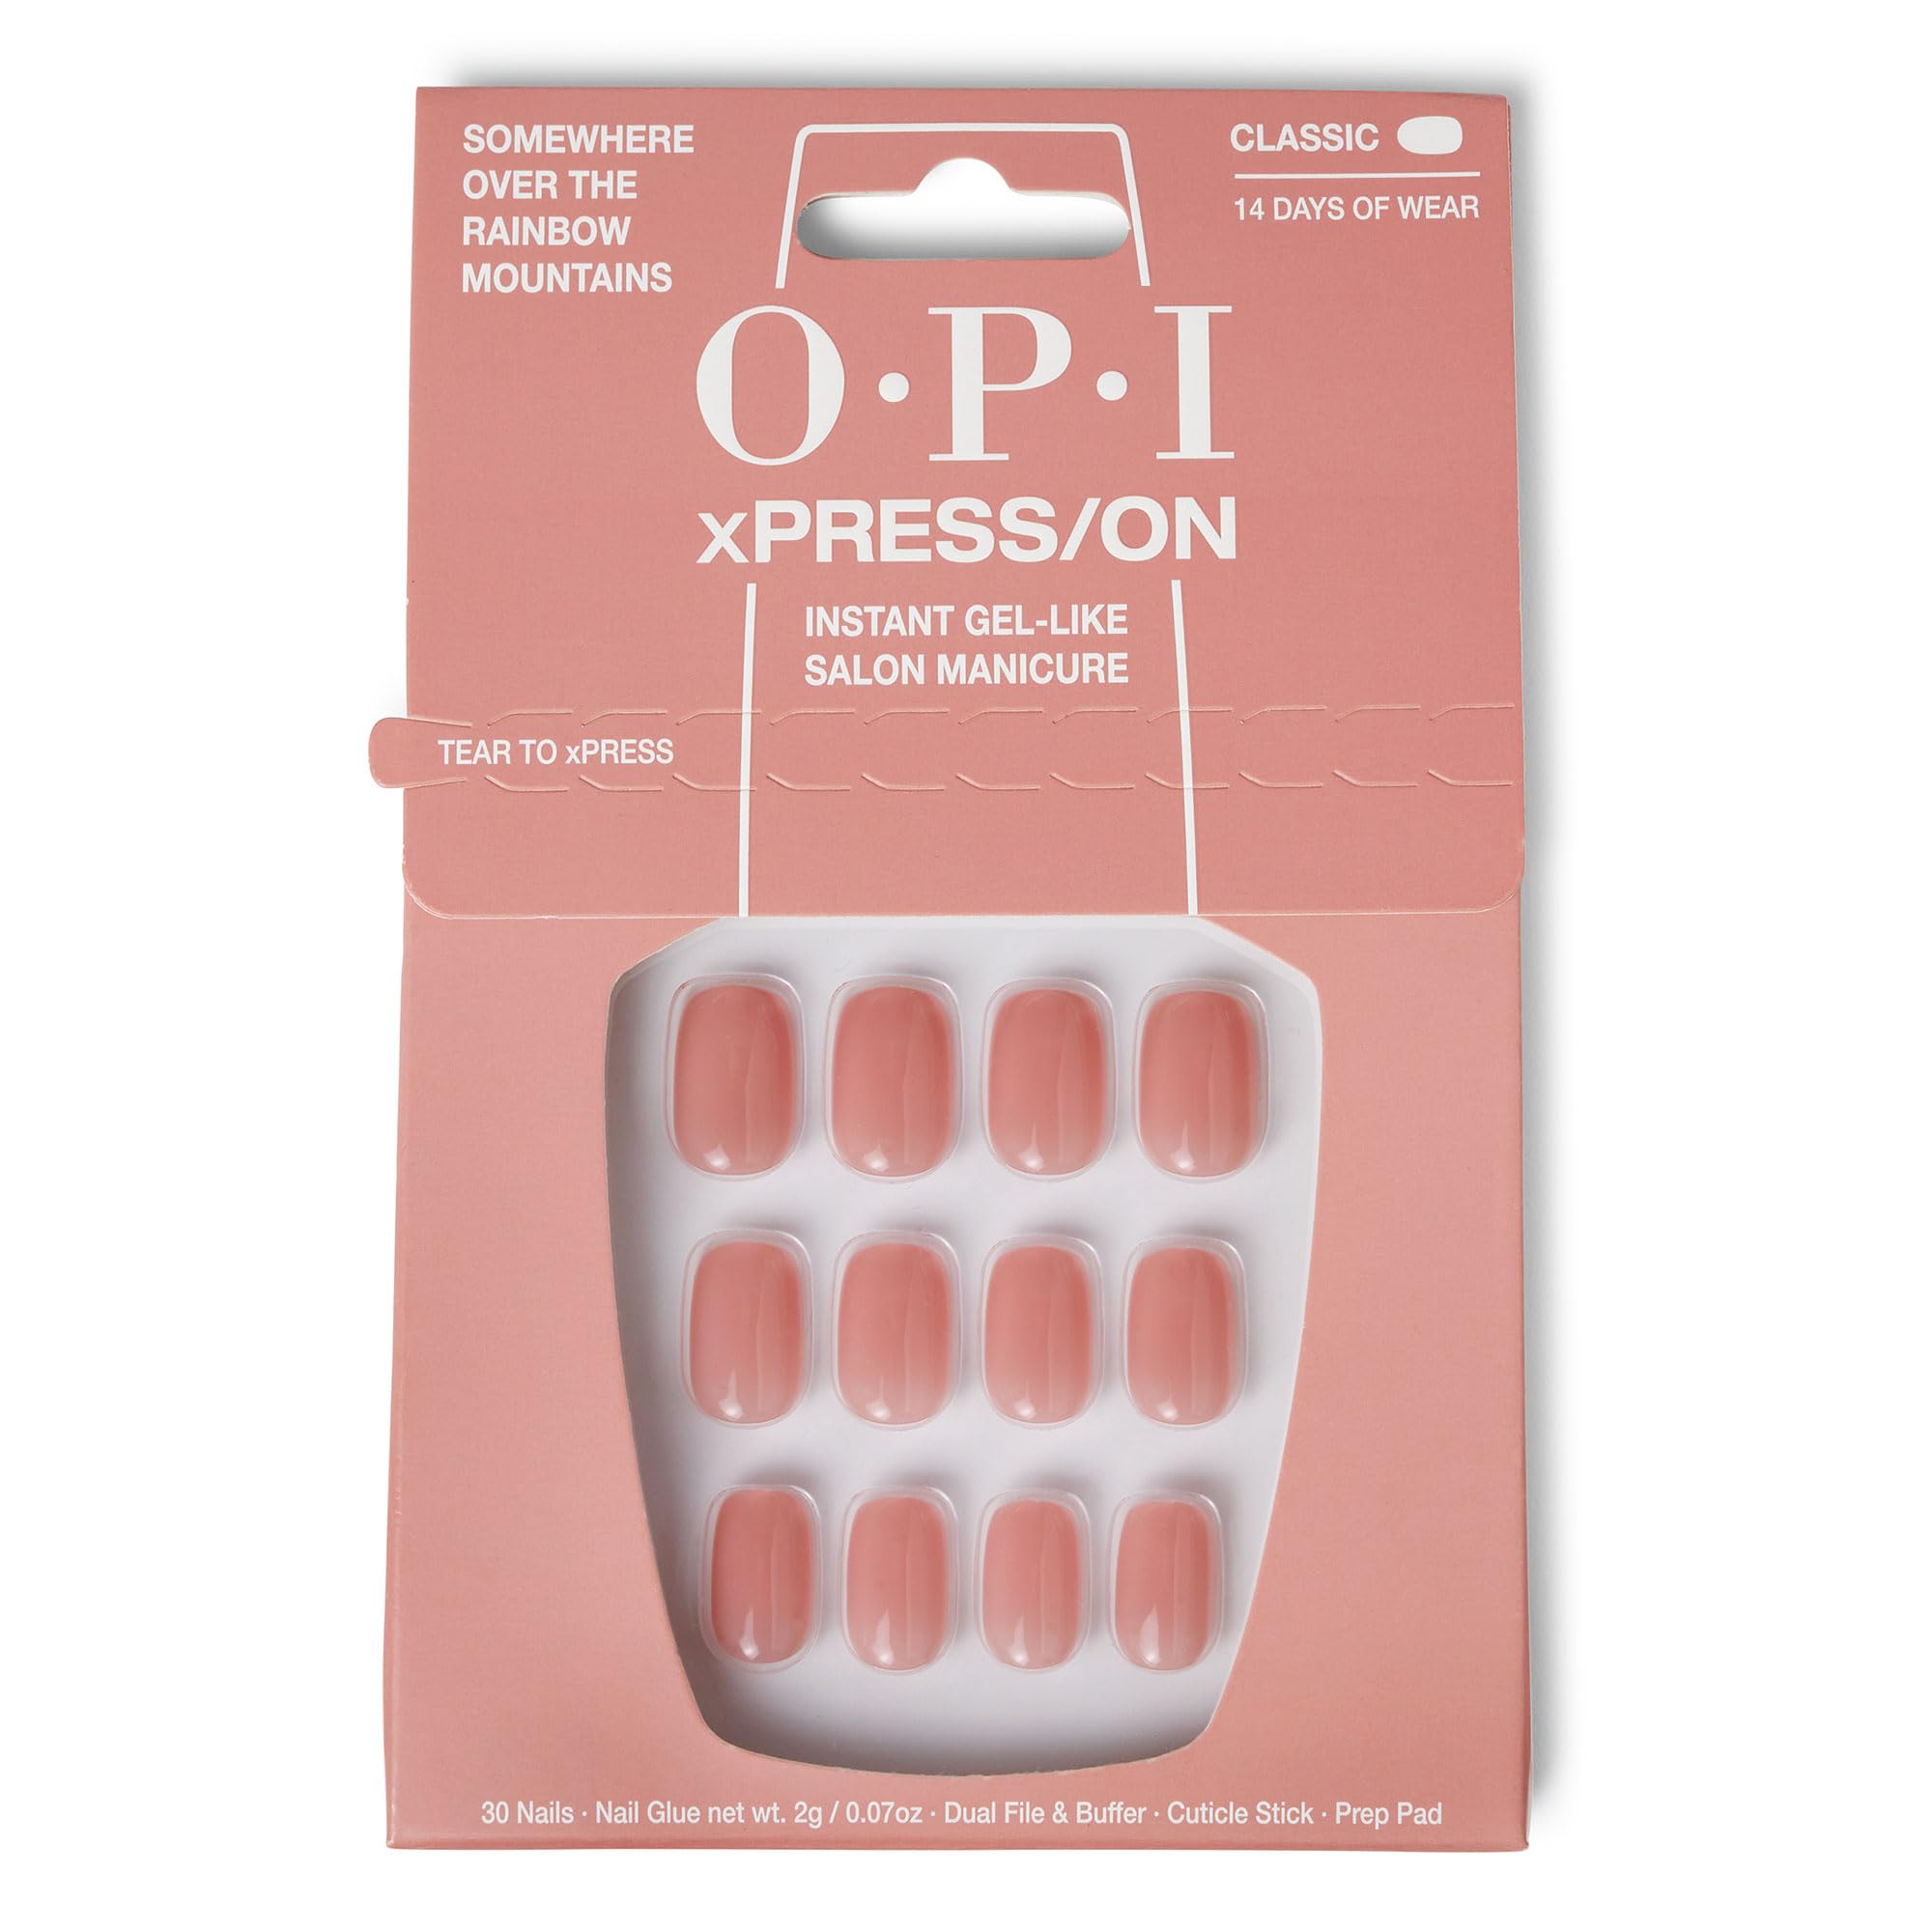 OPI xPRESS/ON Press On Nails, Up to 14 Days of Wear, Gel-Like Salon Manicure, Vegan, Sustainable Packaging, With Nail Glue, Short Neutral Nails, Somewhere Over the Rainbow Mountains